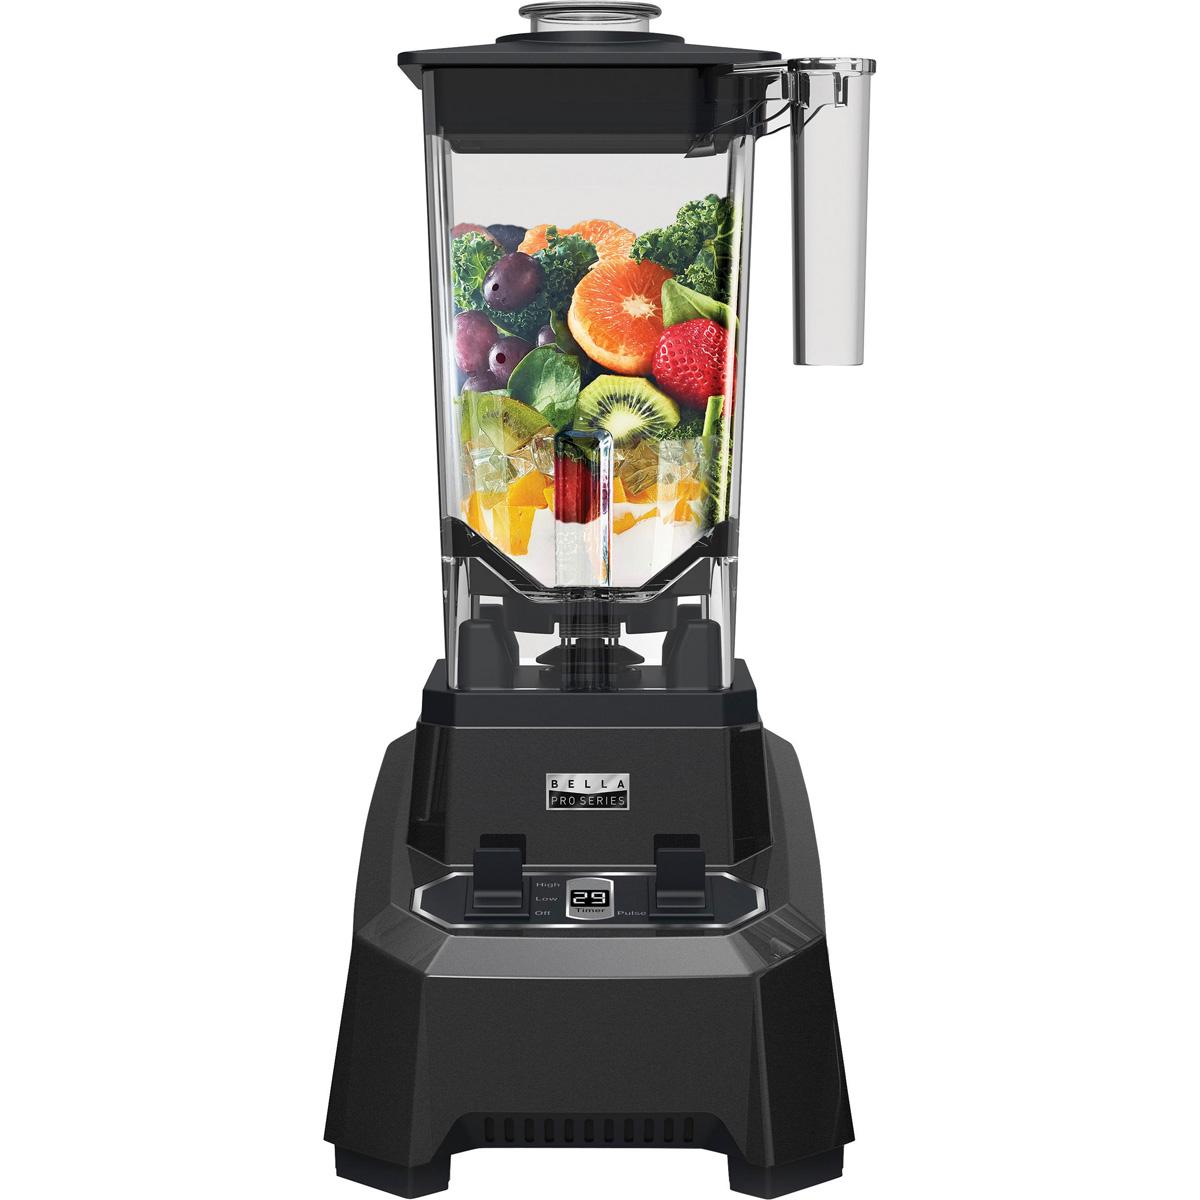 Bella Pro Series Precision Max Performance Blender for $59.99 Shipped